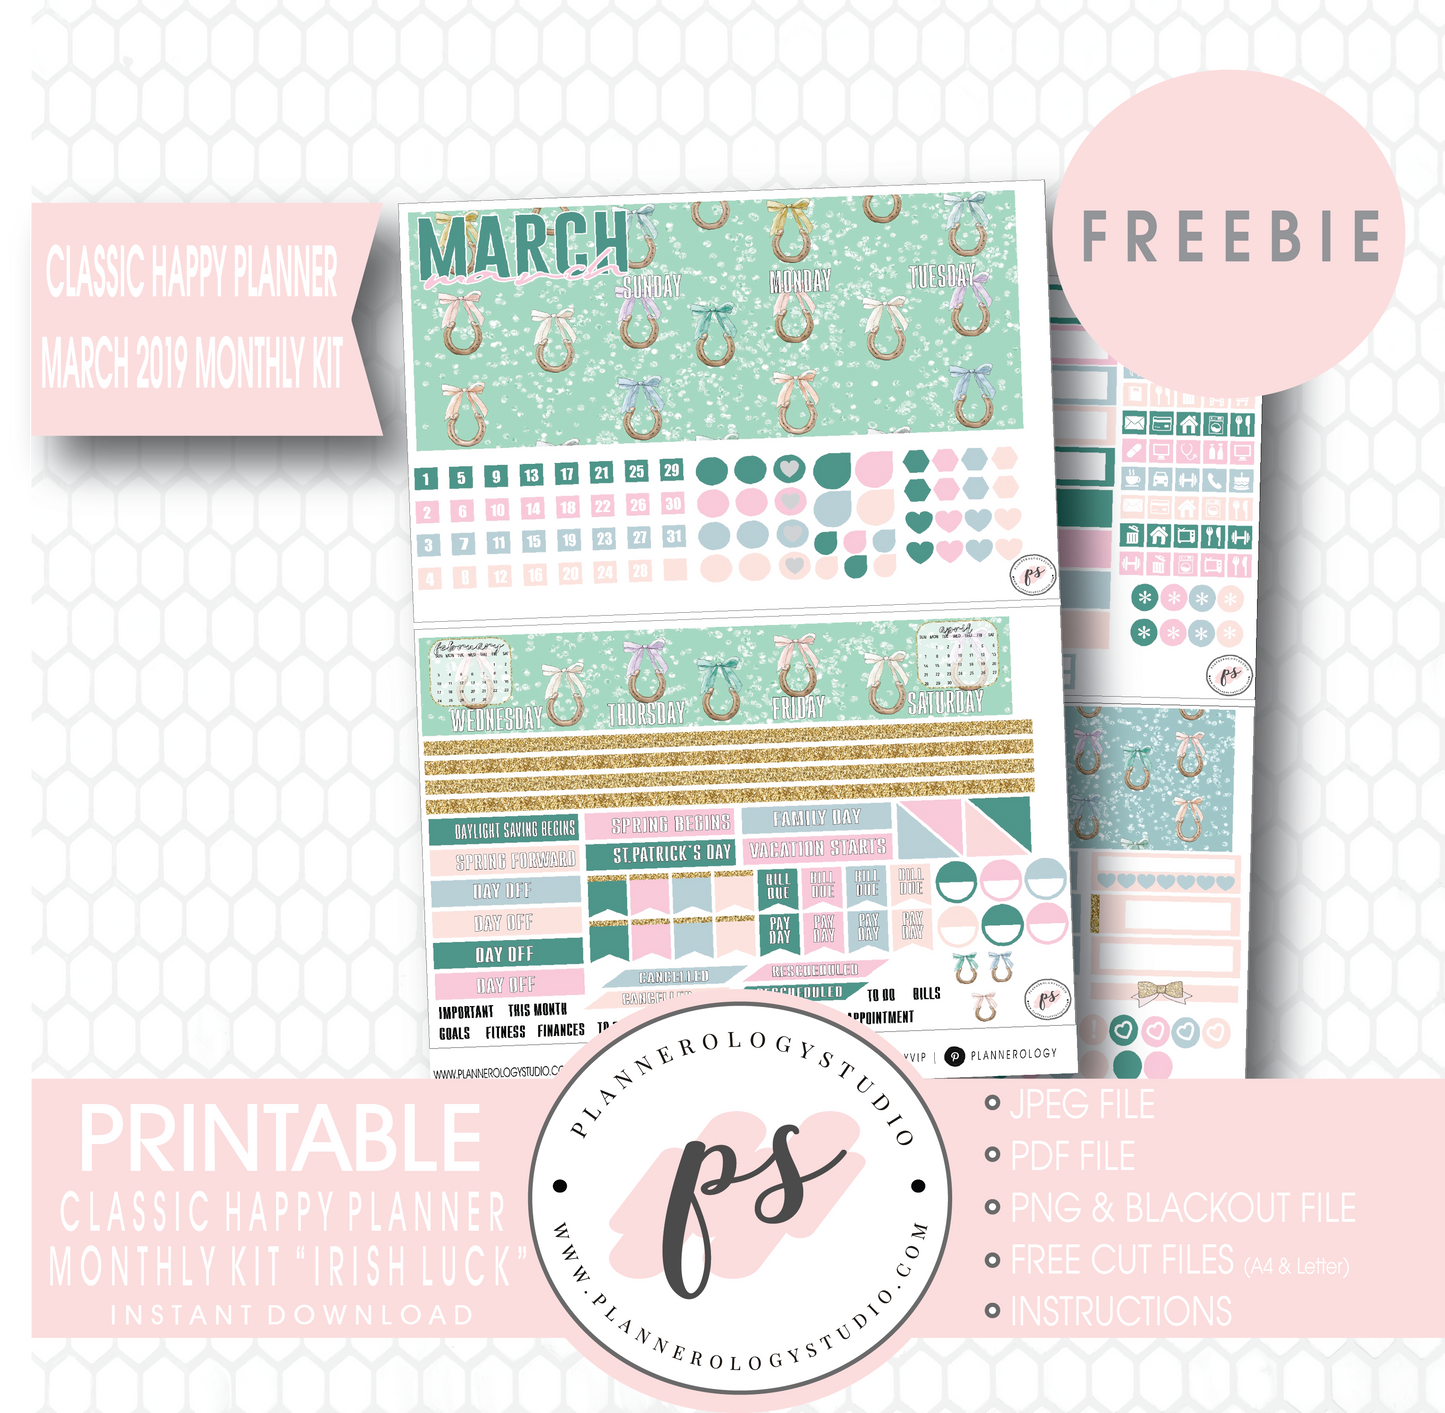 Irish Luck (St. Patrick's Day) Classic Happy Planner March 2019 Monthly Kit Digital Printable Planner Stickers (PDF/JPG/PNG/Cut File Freebie) - Plannerologystudio